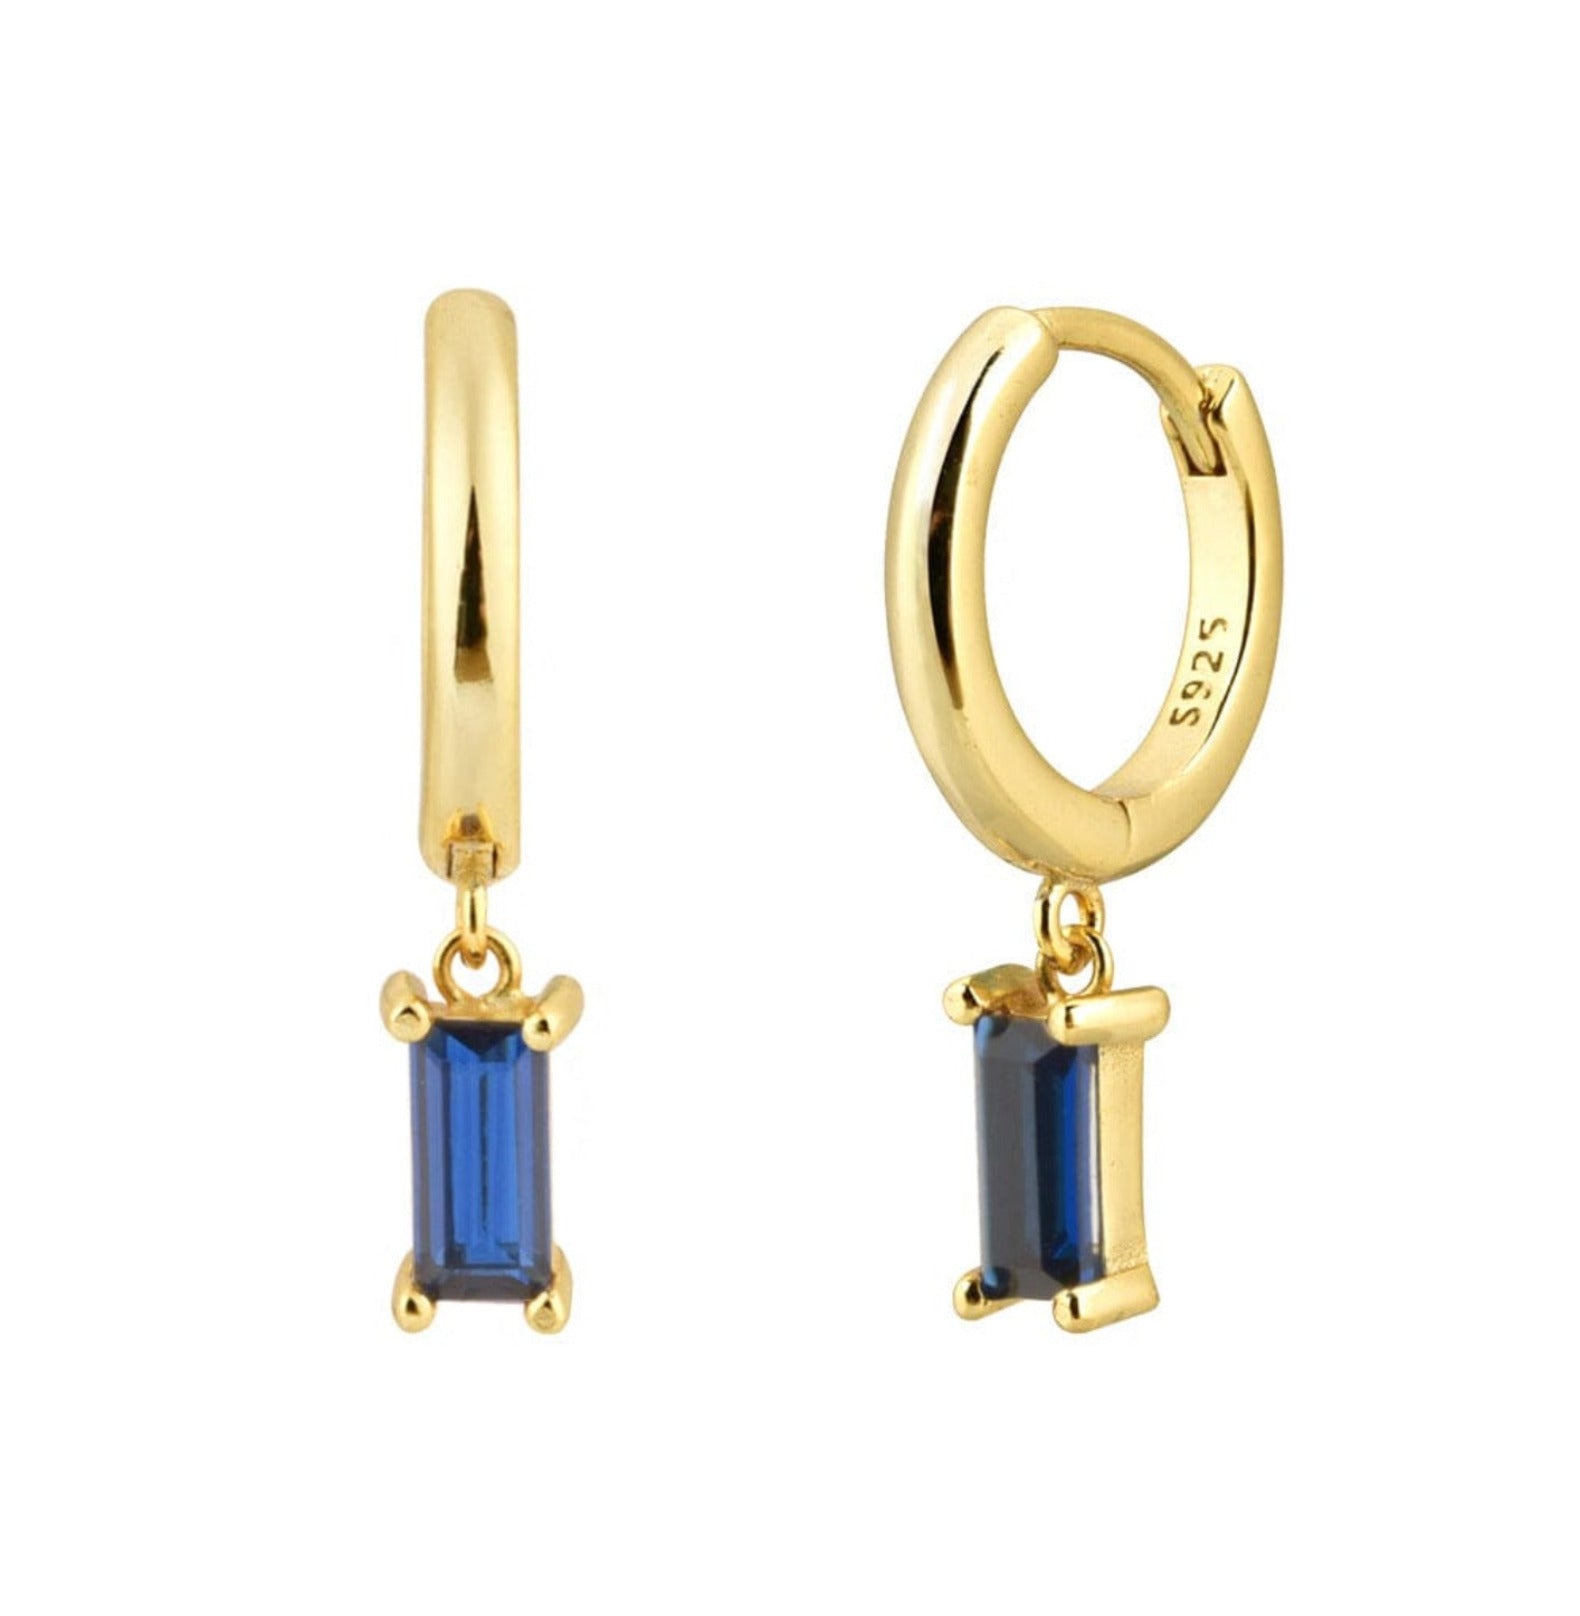 DAINTY EARRINGS earing Yubama Jewelry Online Store - The Elegant Designs of Gold and Silver ! Blue 